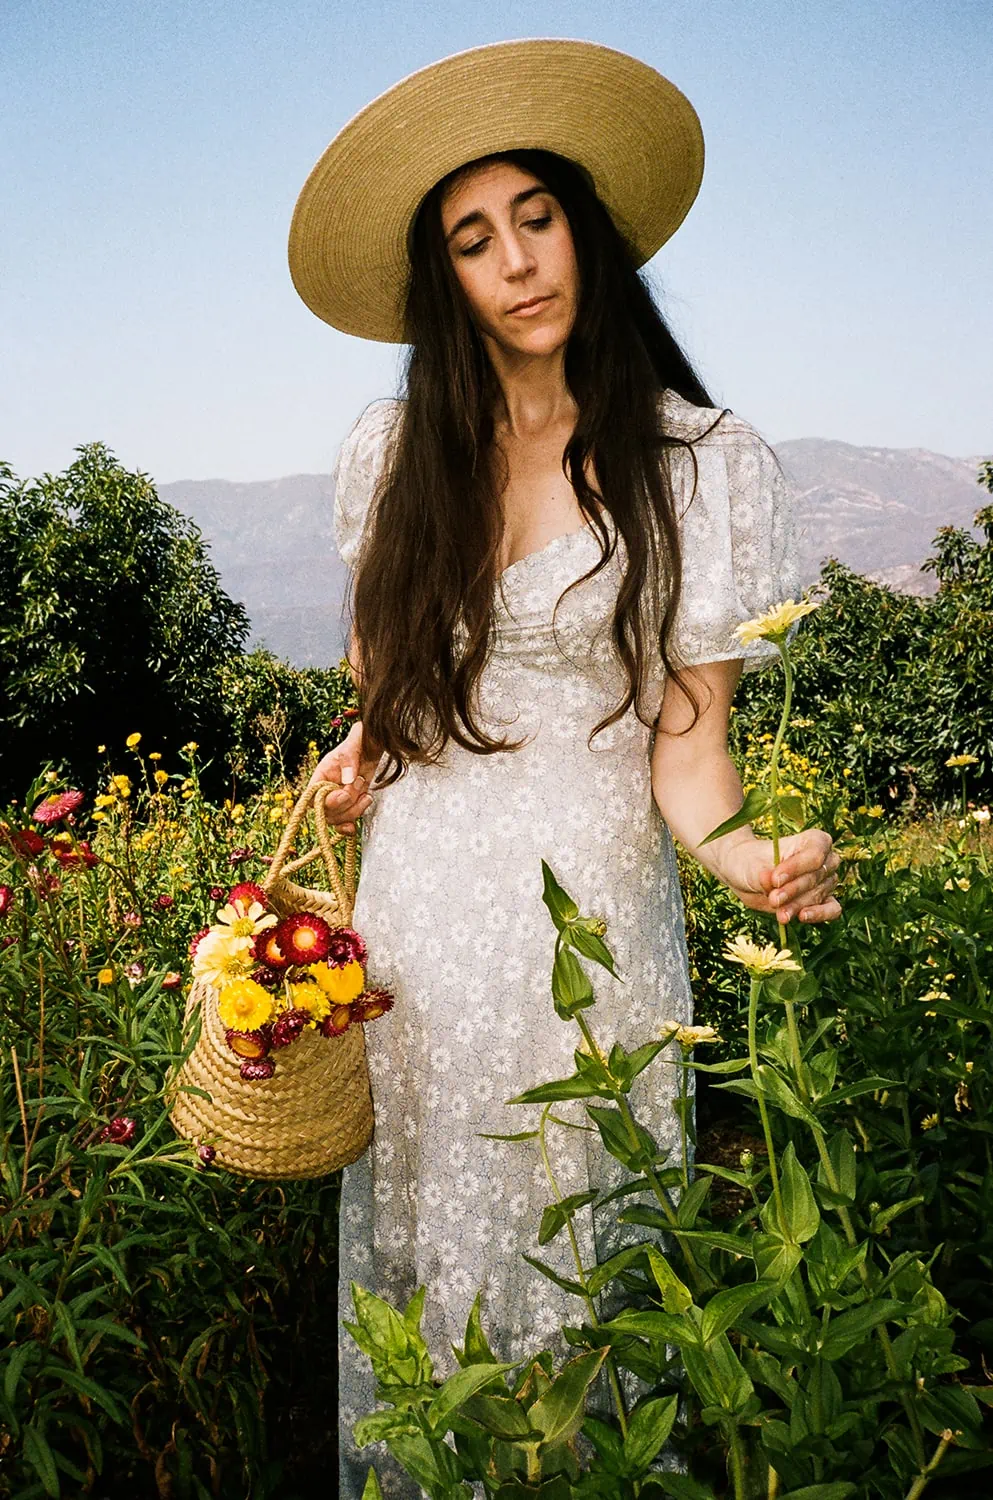 Loria Stern, a tall woman with brown hair wearing a white dress and a straw hat, stands in a field of flowers with a basket of flowers in her hand.